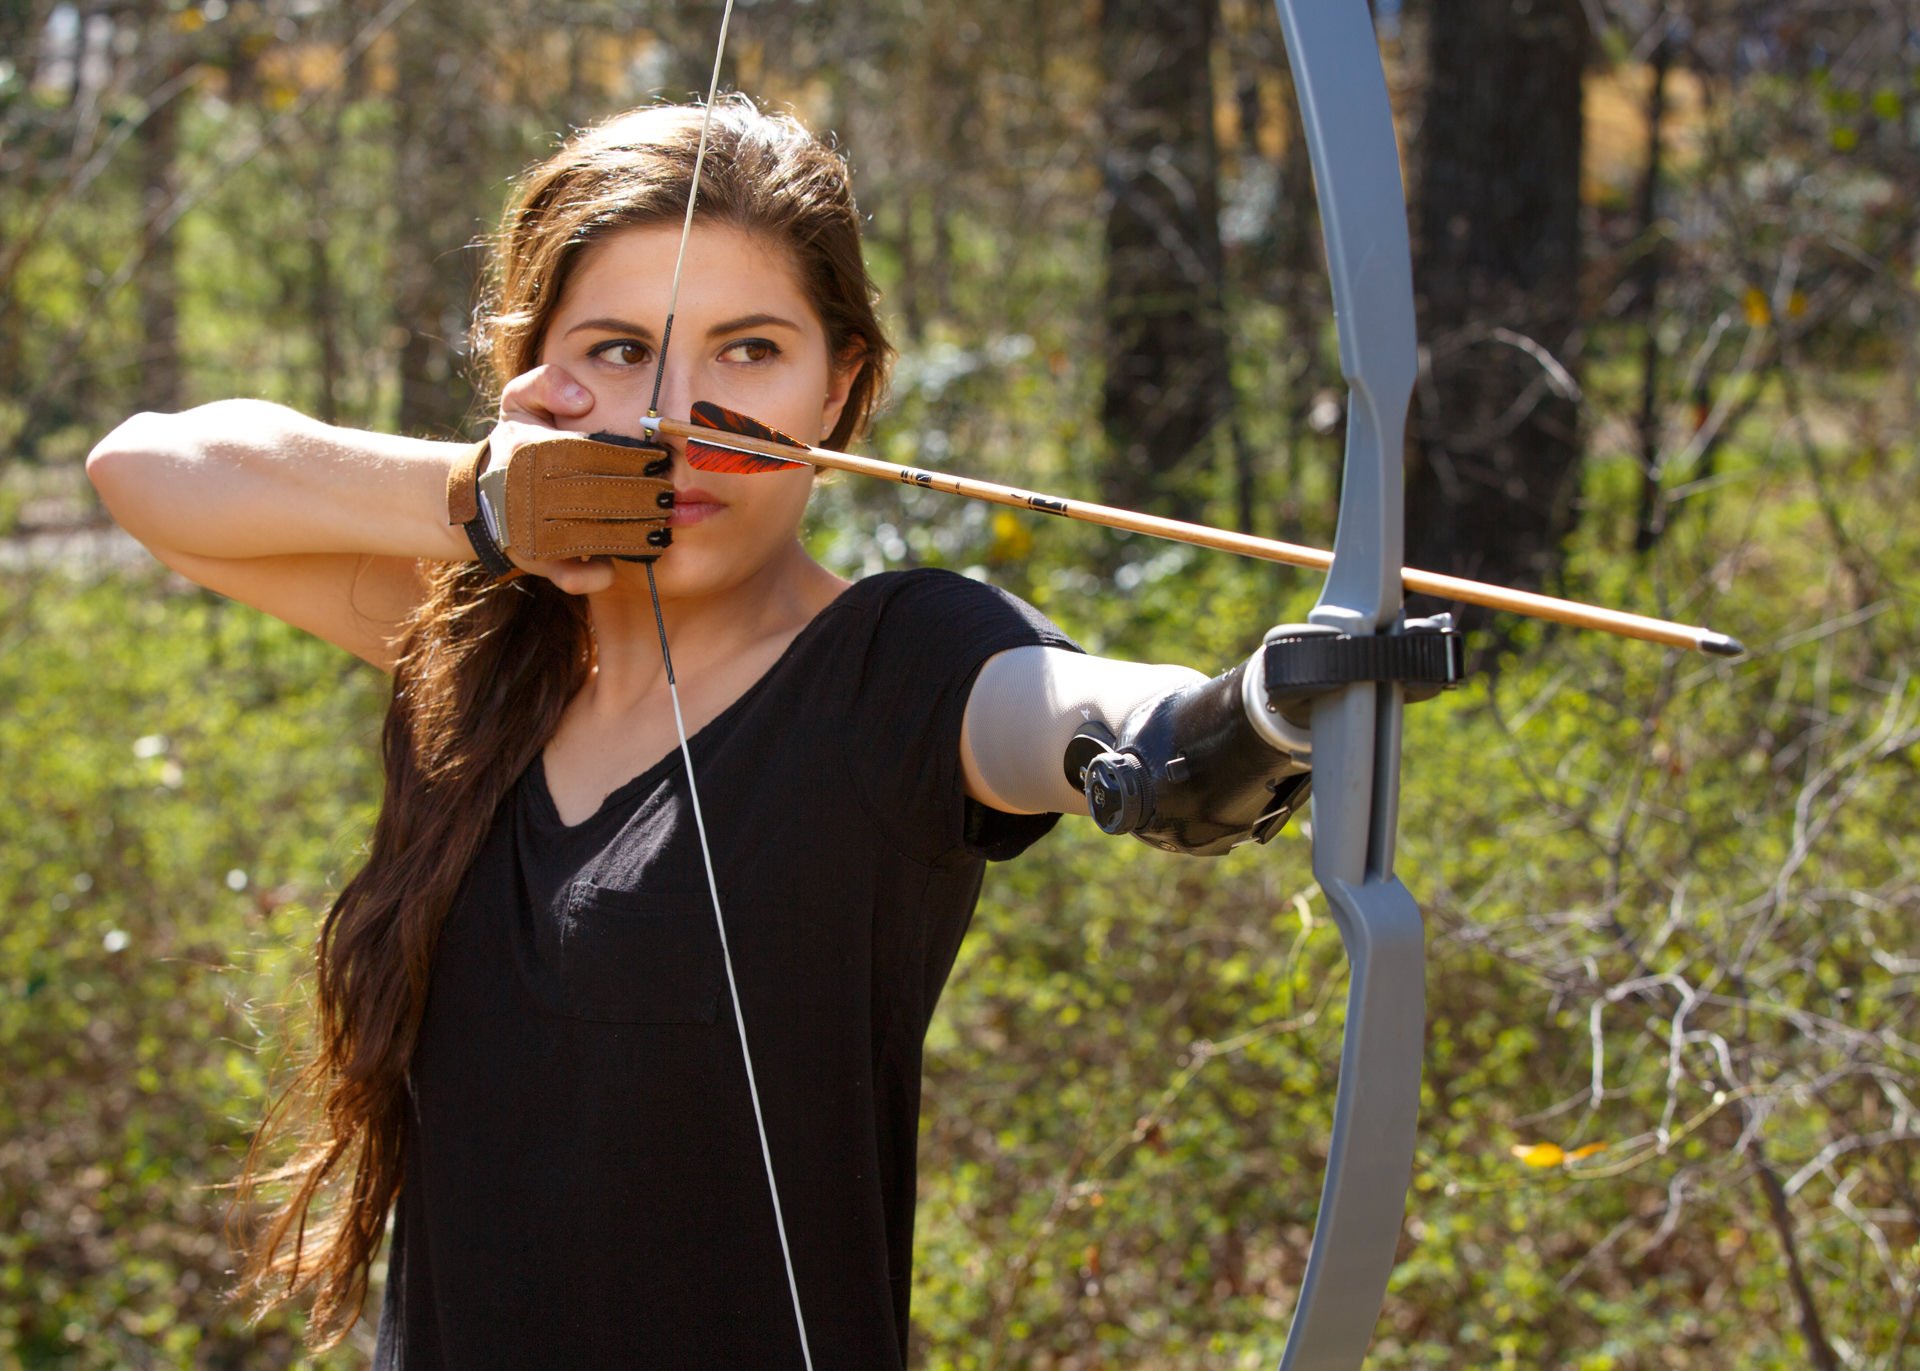 Angel Giuffria uses her activity-specific prosthesis to practice archery.